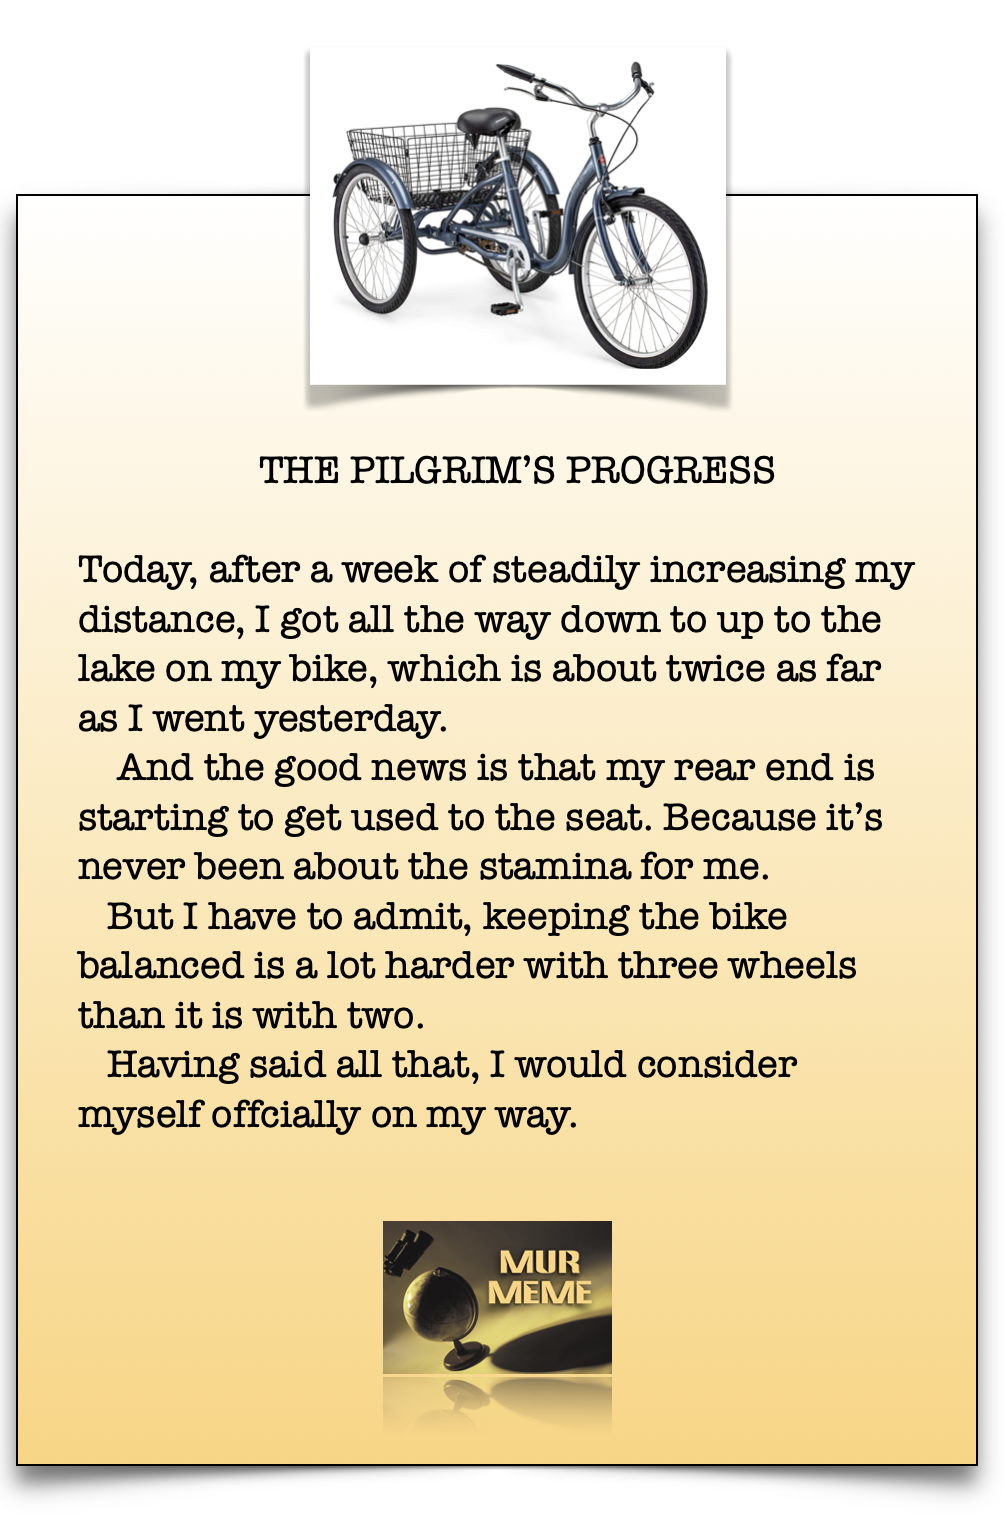 THE PILGRIM'S PROGRESS

Today, after a week of steadily increasing my
distance, I got all the way down to up to the
lake on my bike, which is about twice as far
as I went yesterday.

And the good news is that my rear end is
starting to get used to the seat. Because it's
never been about the stamina for me.

But I have to admit, keeping the bike
balanced is a lot harder with three wheels
than it is with two.

Having said all that, I would consider
myself offcially on my way.